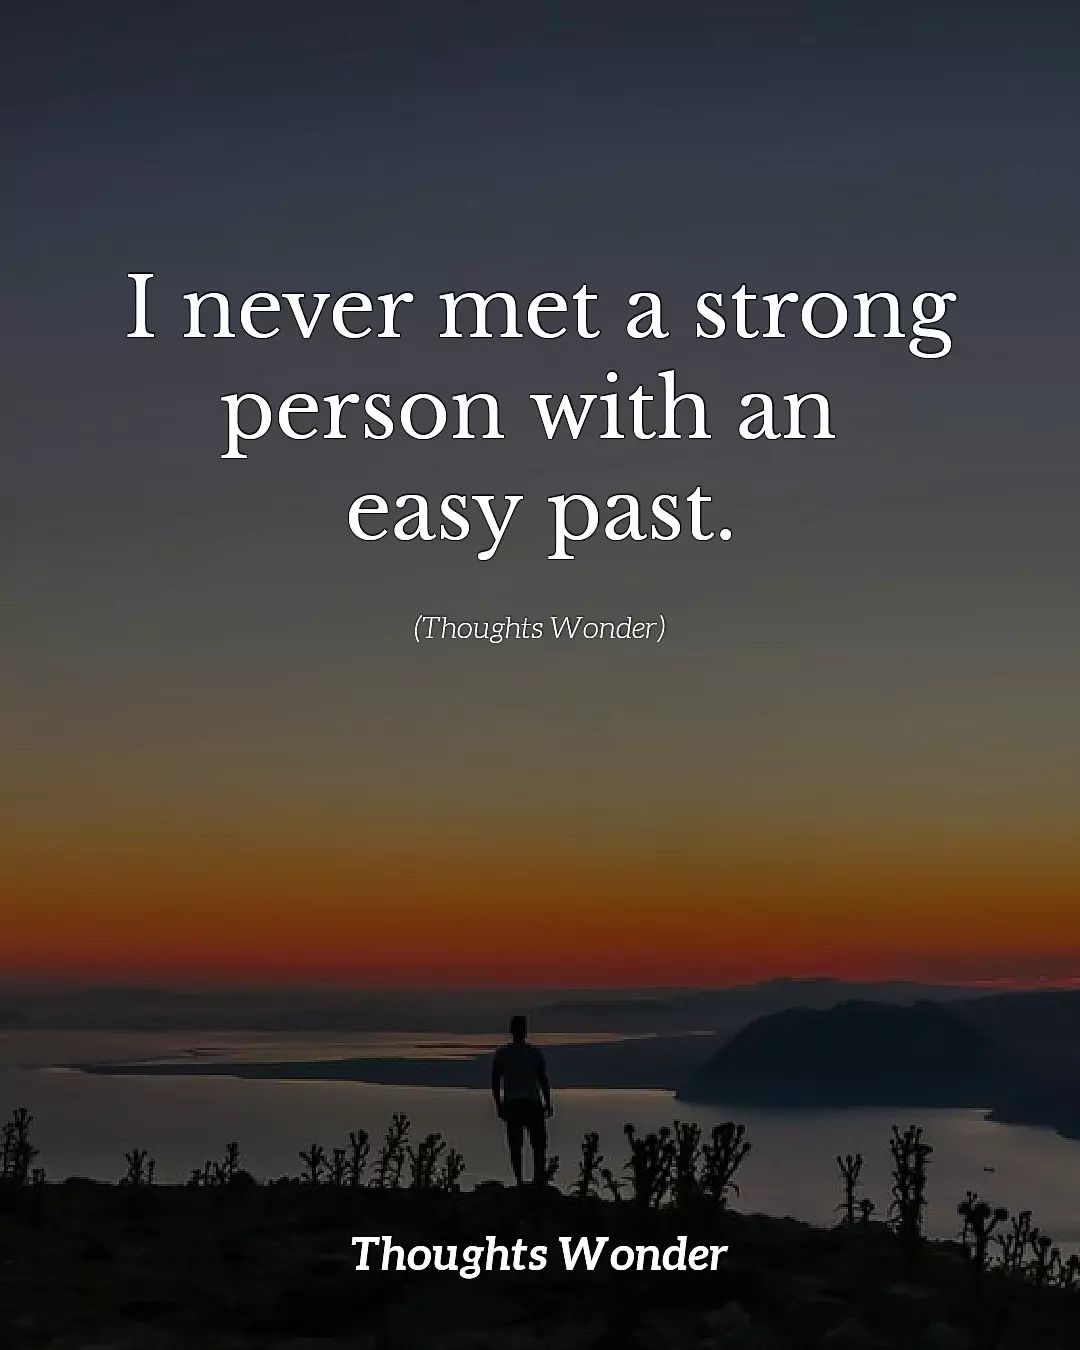 I never met a strong person with an easy past.